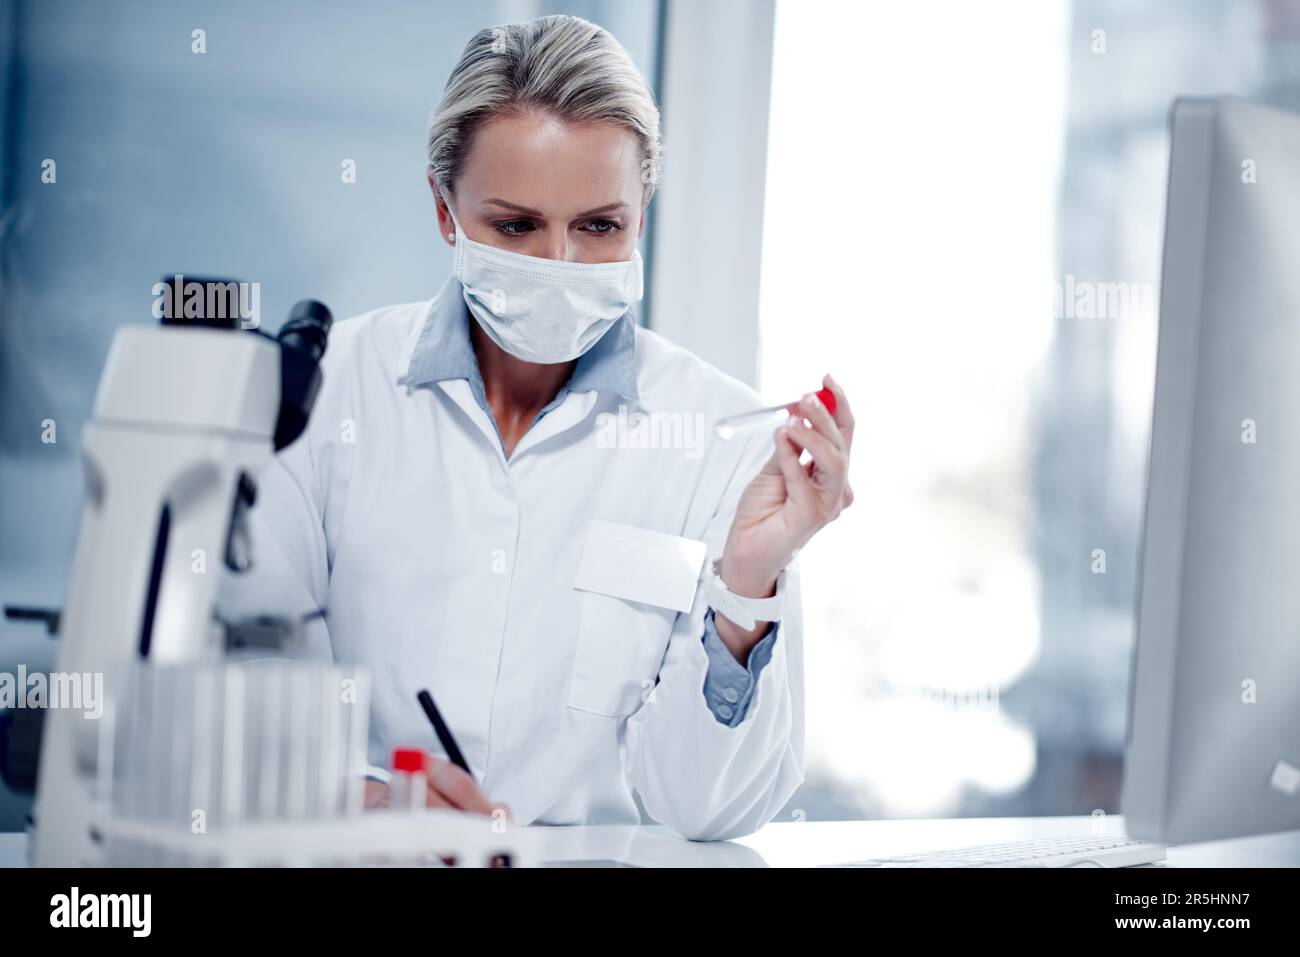 No detail goes unnoticed. a mature scientist working in her lab. Stock Photo